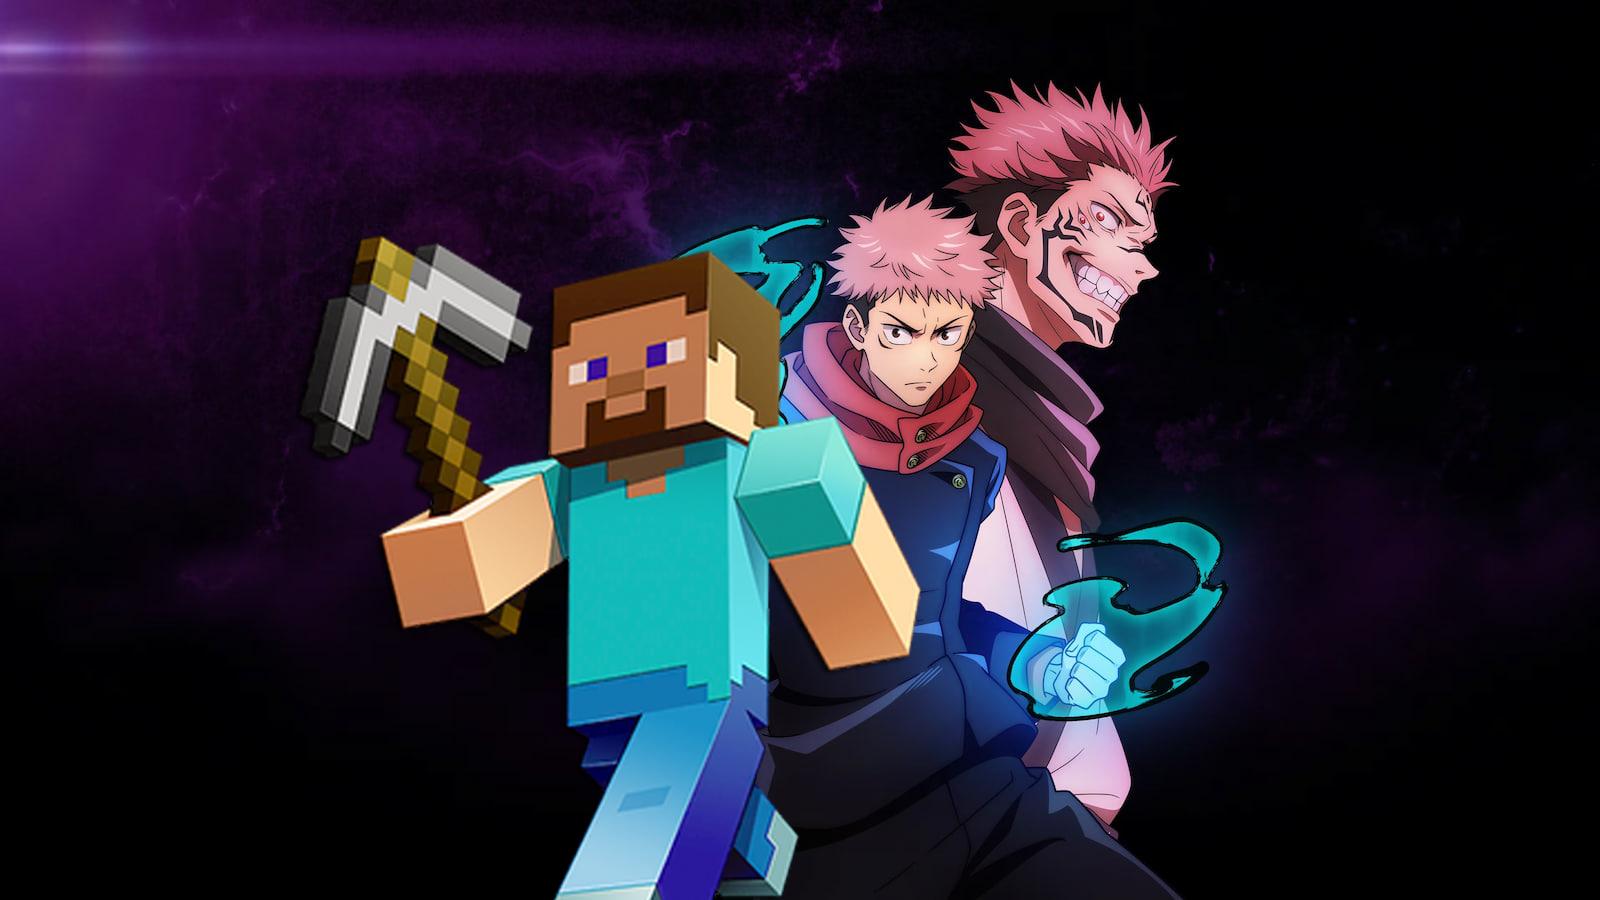 Minecraft fans convinced 15th anniversary ad hides Jujutsu Kaisen reference